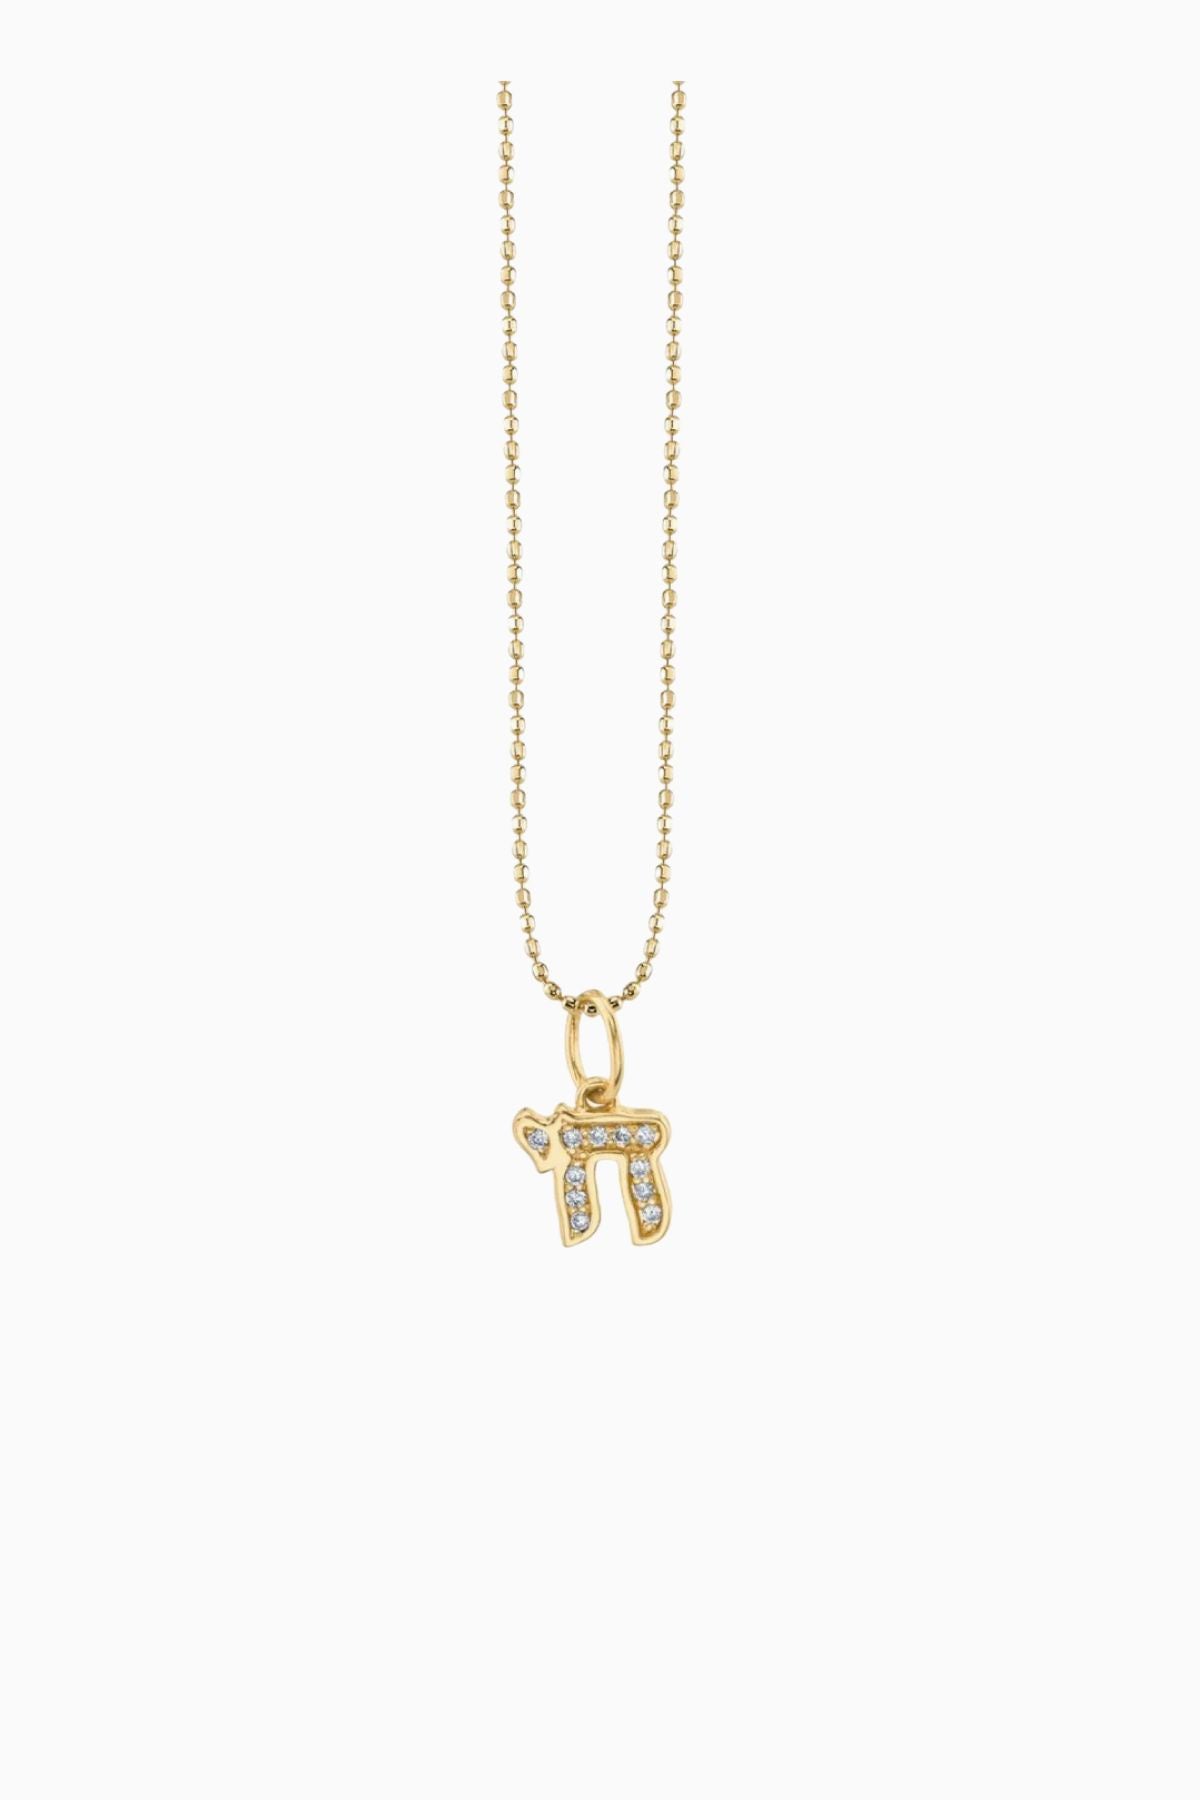 Sydney Evan Small Chai Charm Necklace - Yellow Gold